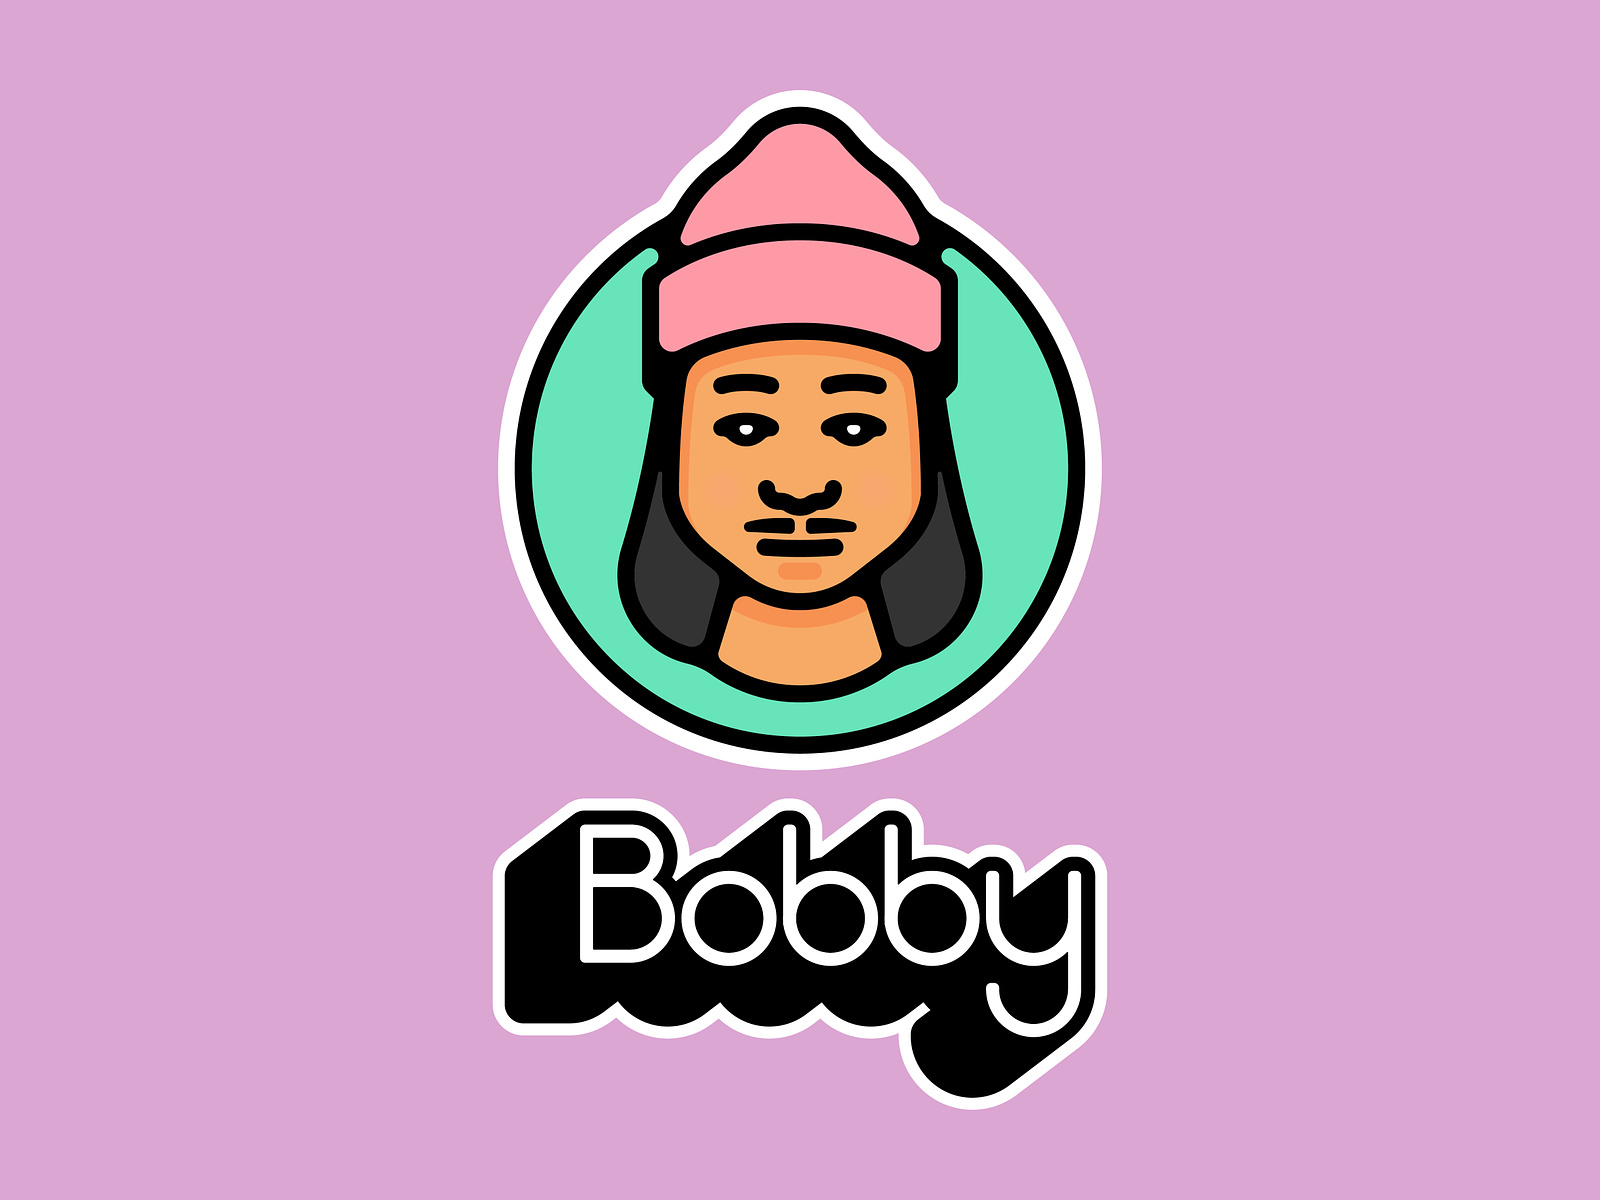 BOBBY LEE by Chris Costa on Dribbble